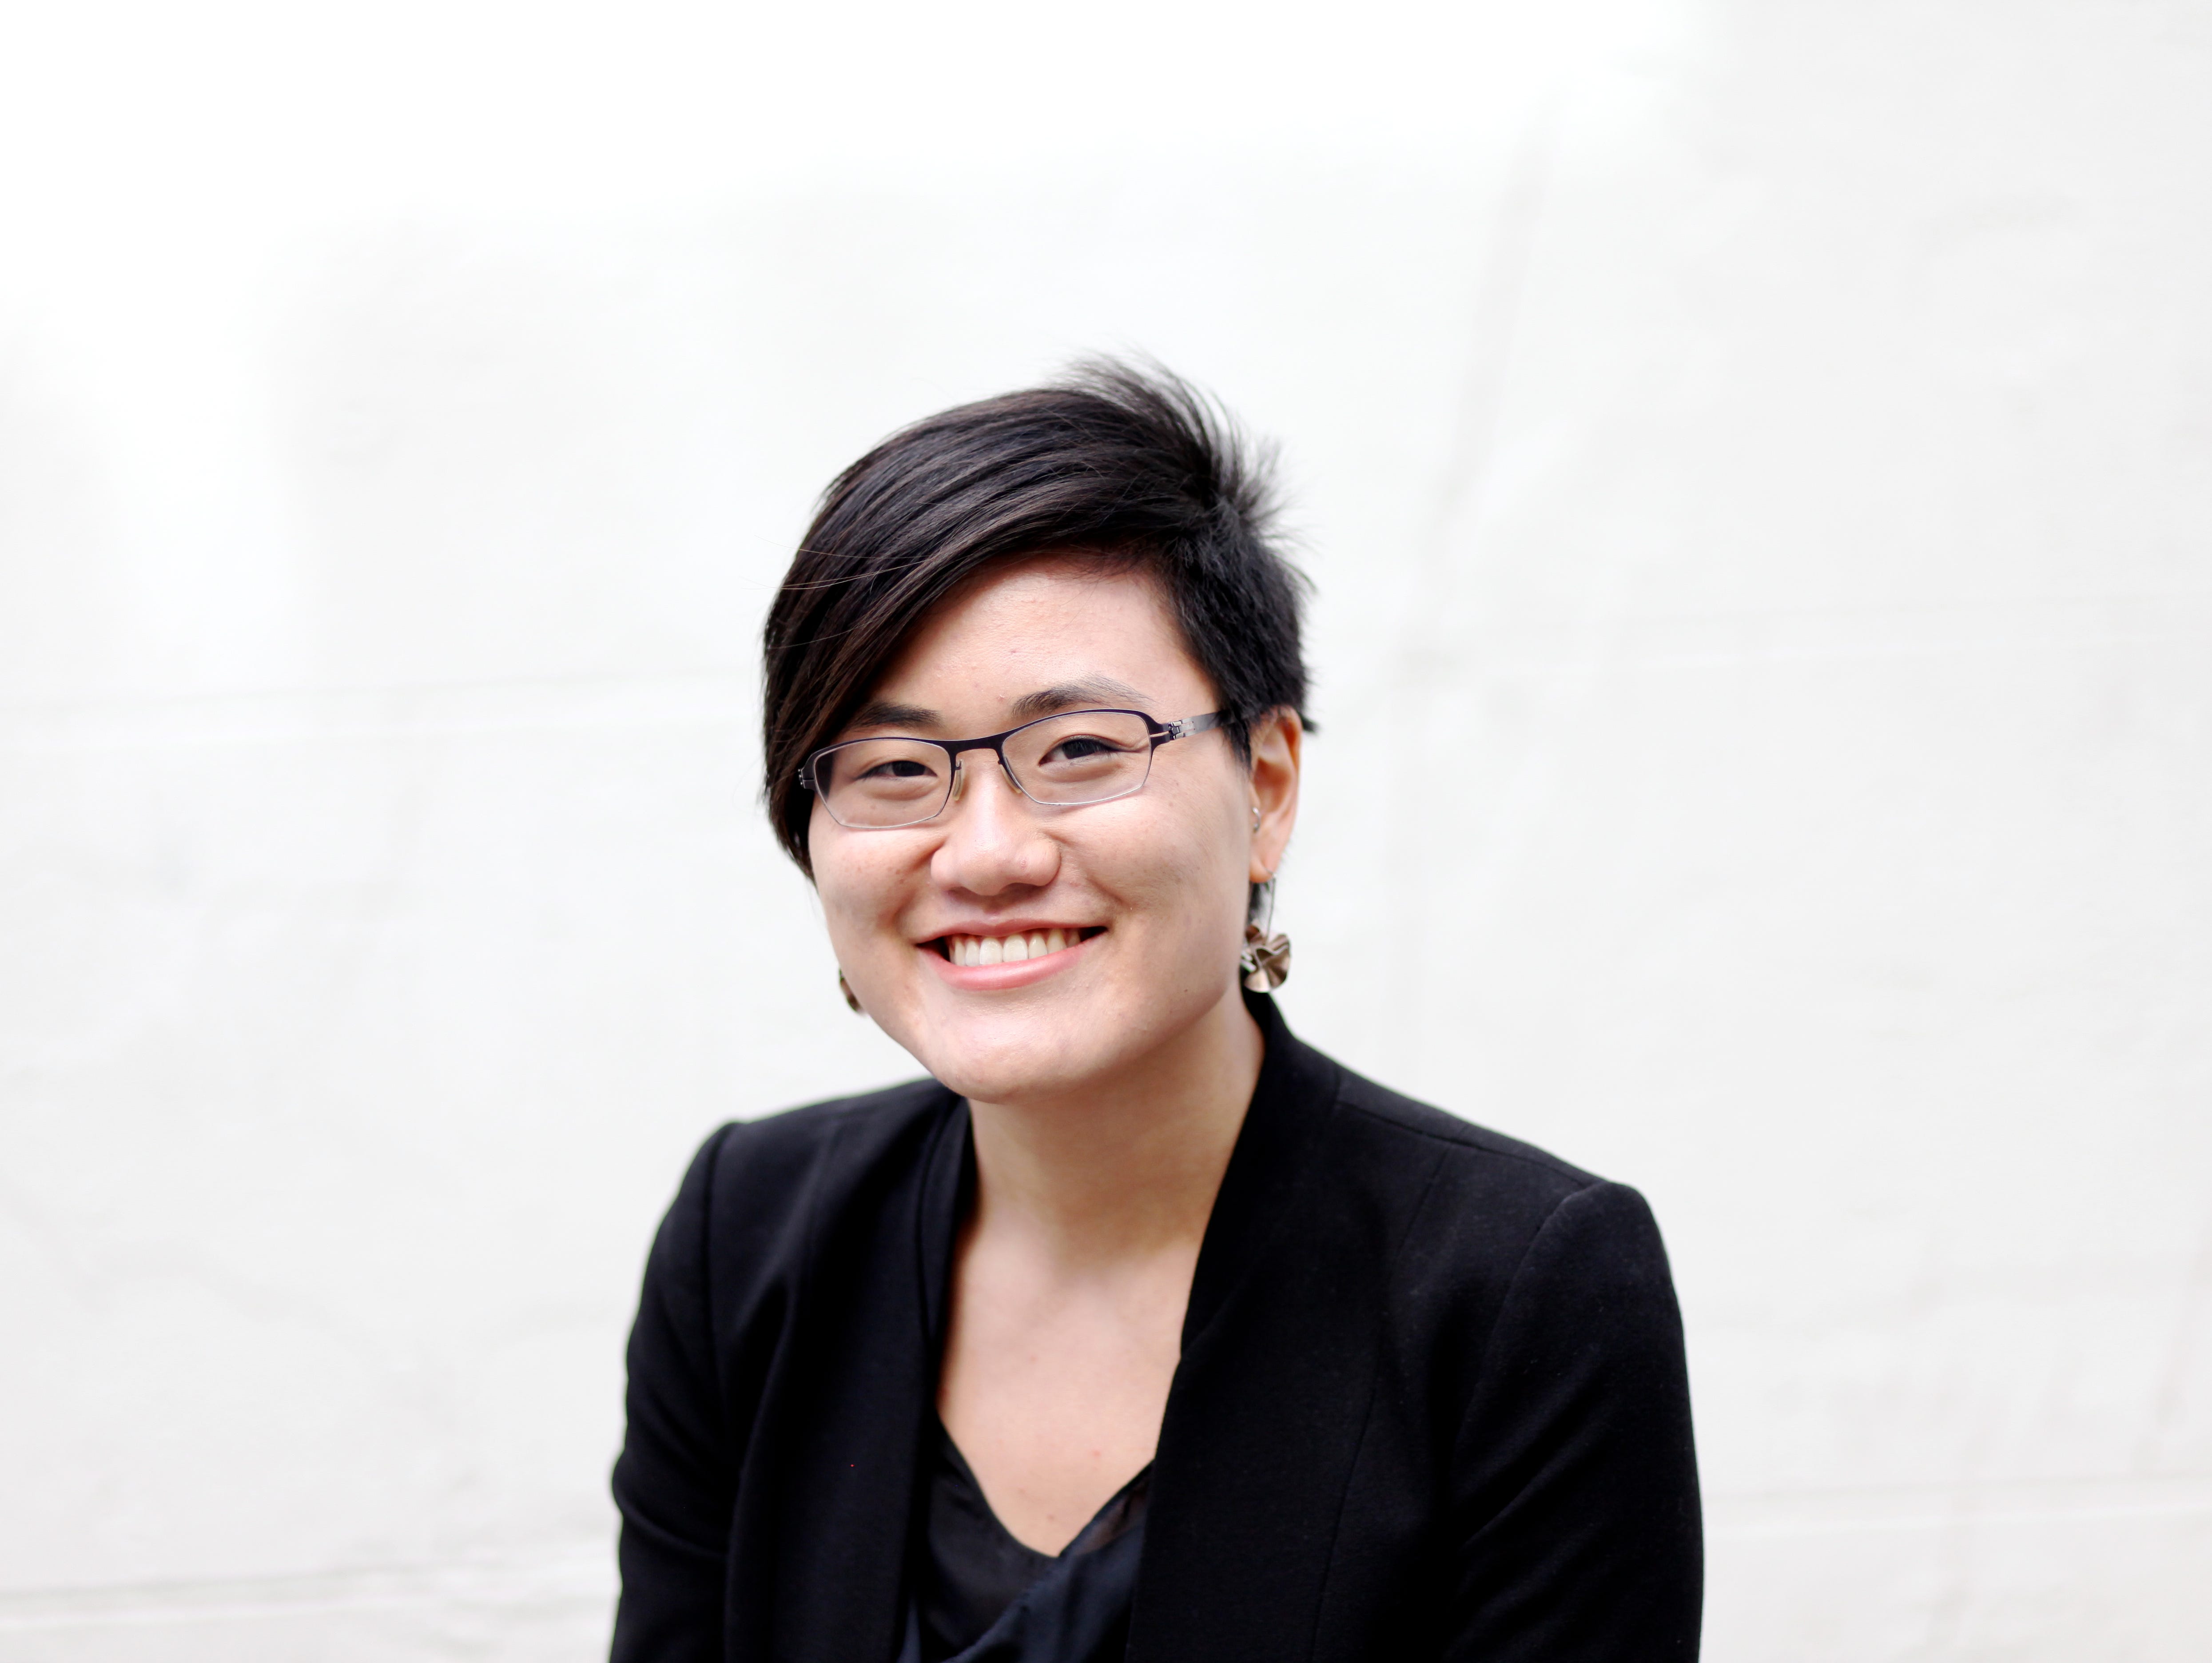 Sarah Nahm is the founder and CEO of Lever, a San Francisco, Calif.-based startup that builds software to help companies source, interview, and hire top talent without compromising their culture and values.